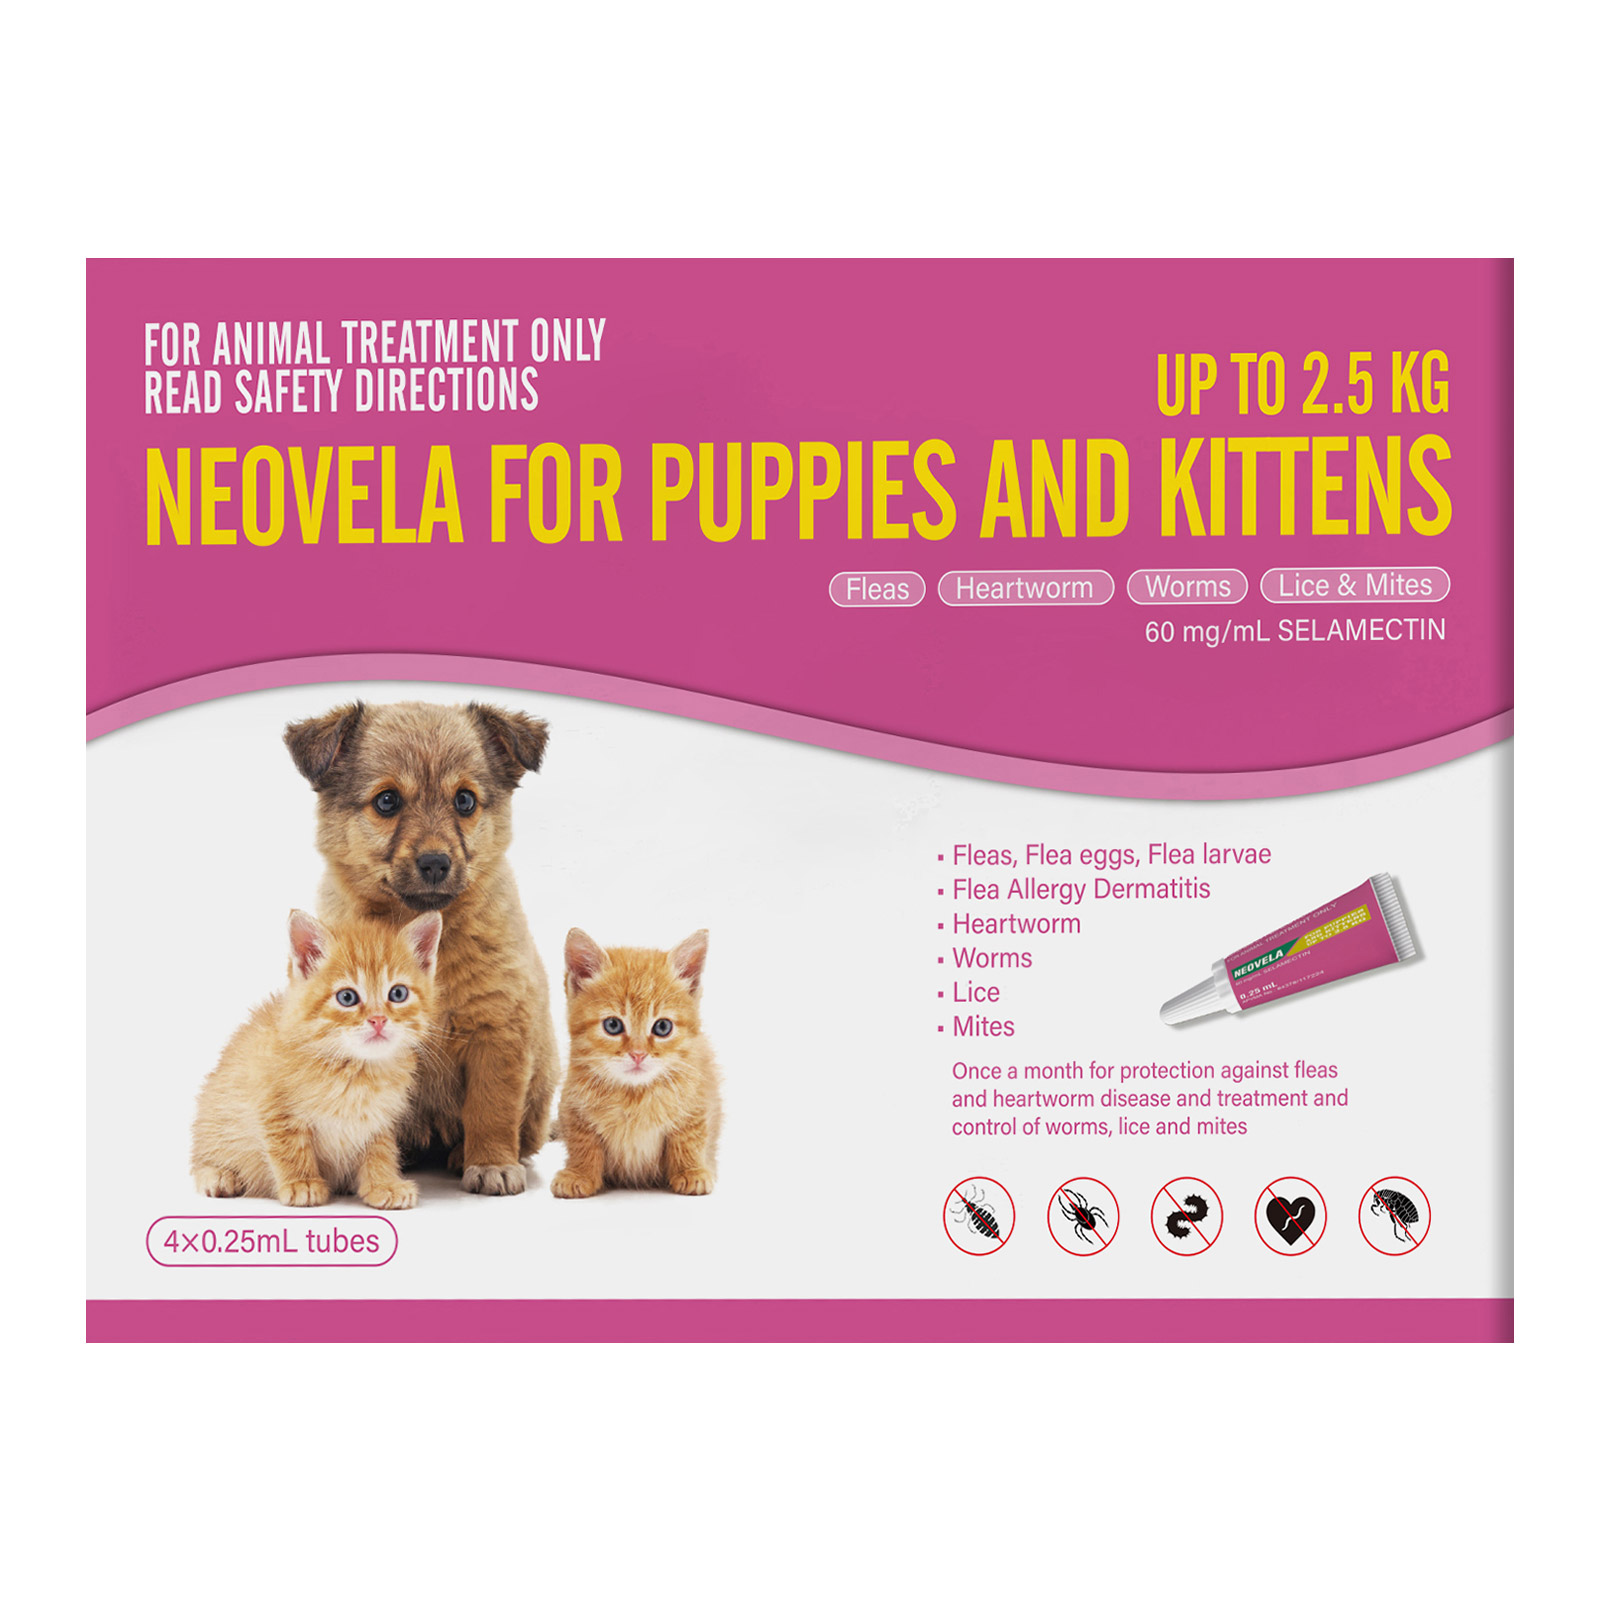 Buy Neovela (Selamectin) Flea And Worming for Cats Online at DiscountPetCare.com.au